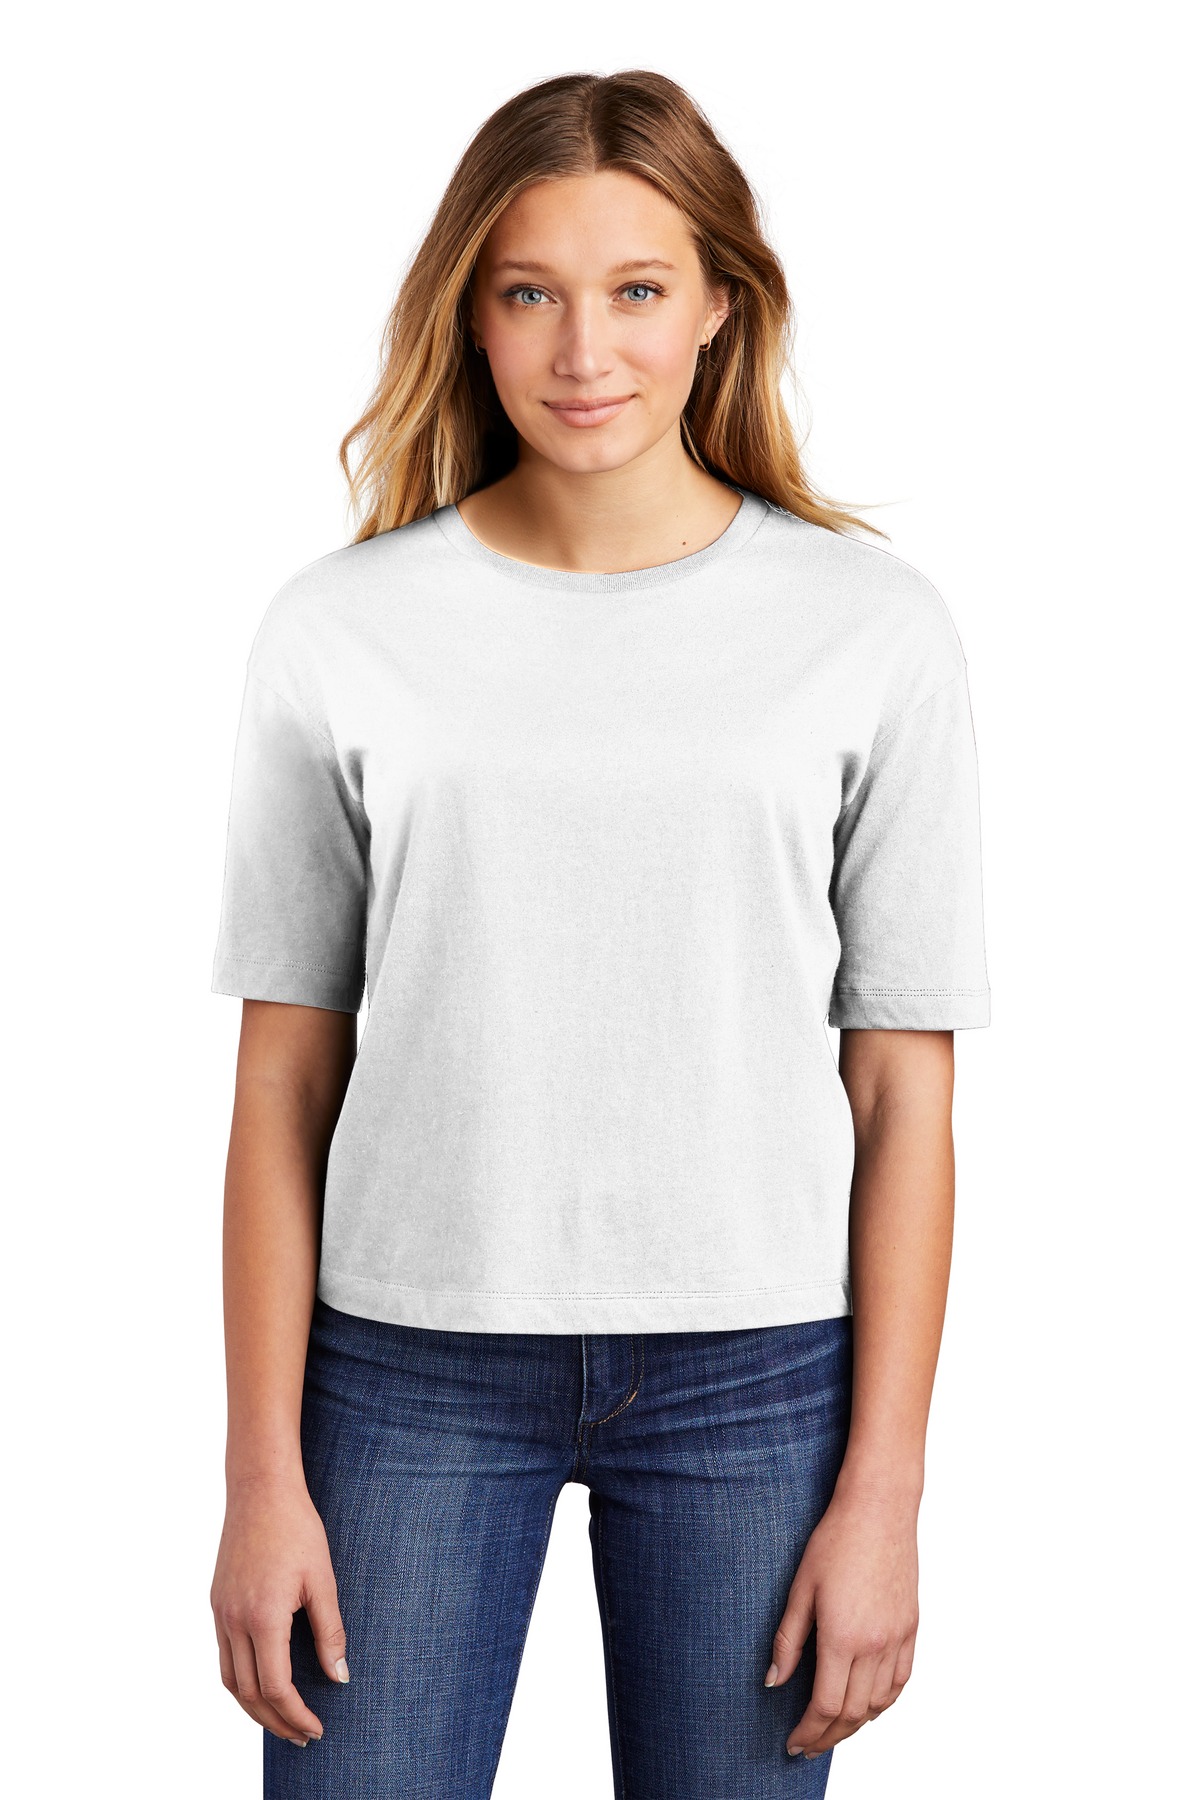 District Ladies Hospitality T-Shirts ® Womens V.I.T. Boxy Tee-District